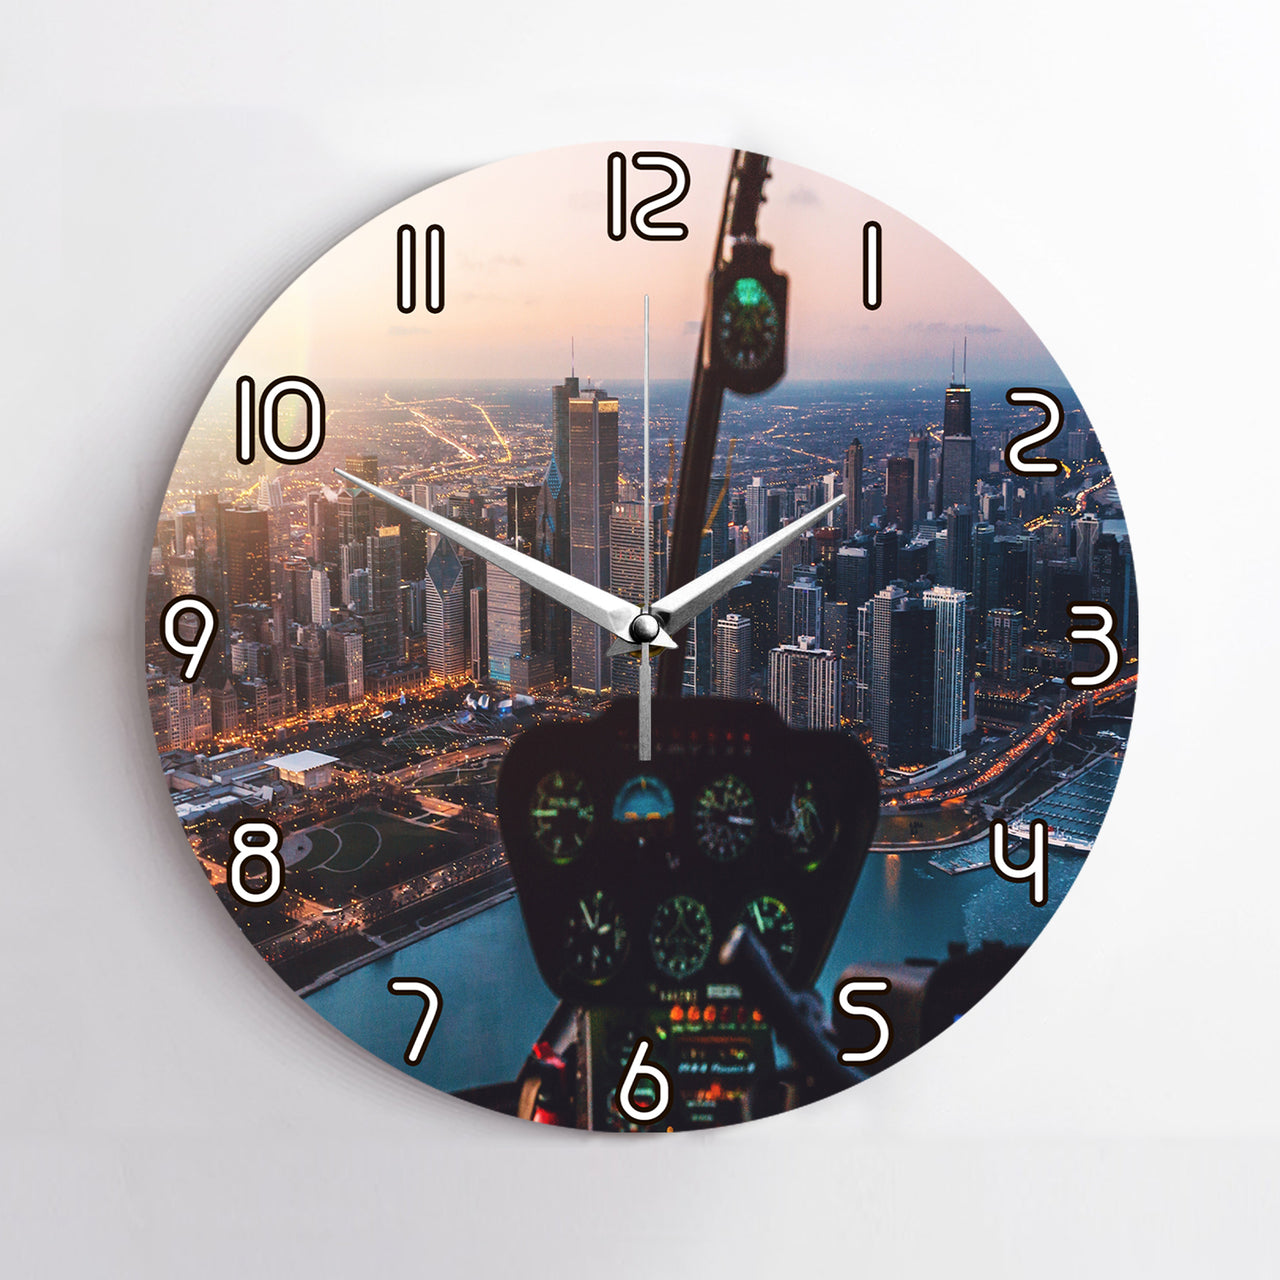 Amazing City View from Helicopter Cockpit Printed Wall Clocks